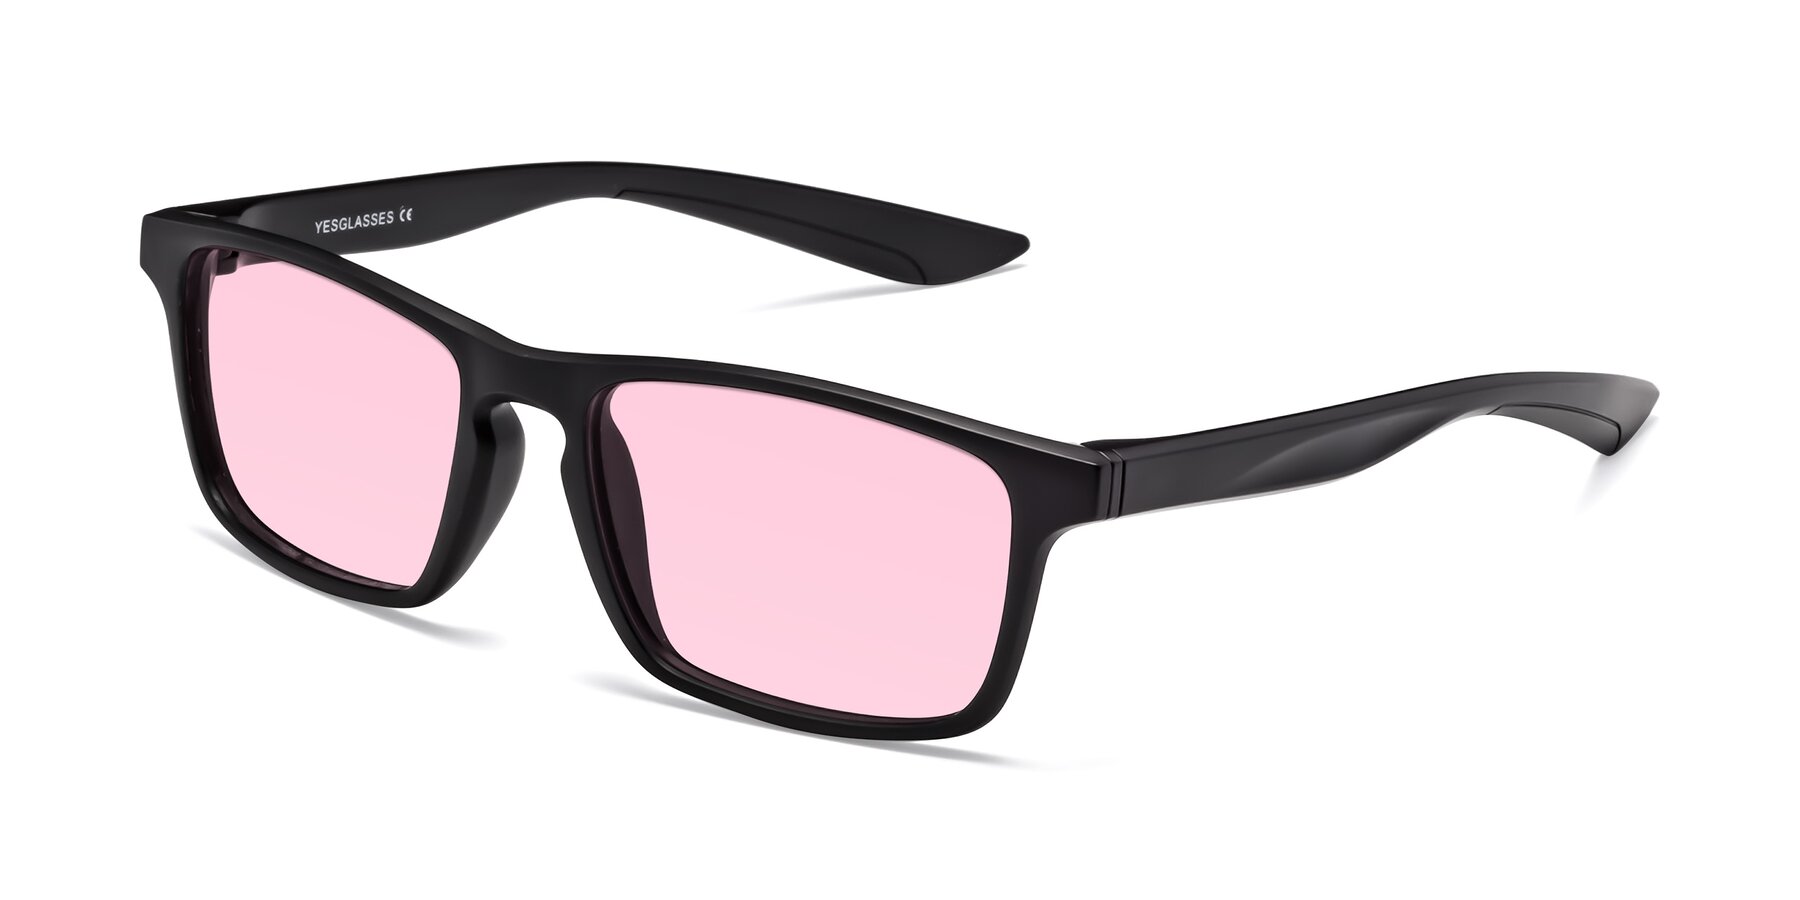 Angle of Passion in Matte Black with Light Pink Tinted Lenses